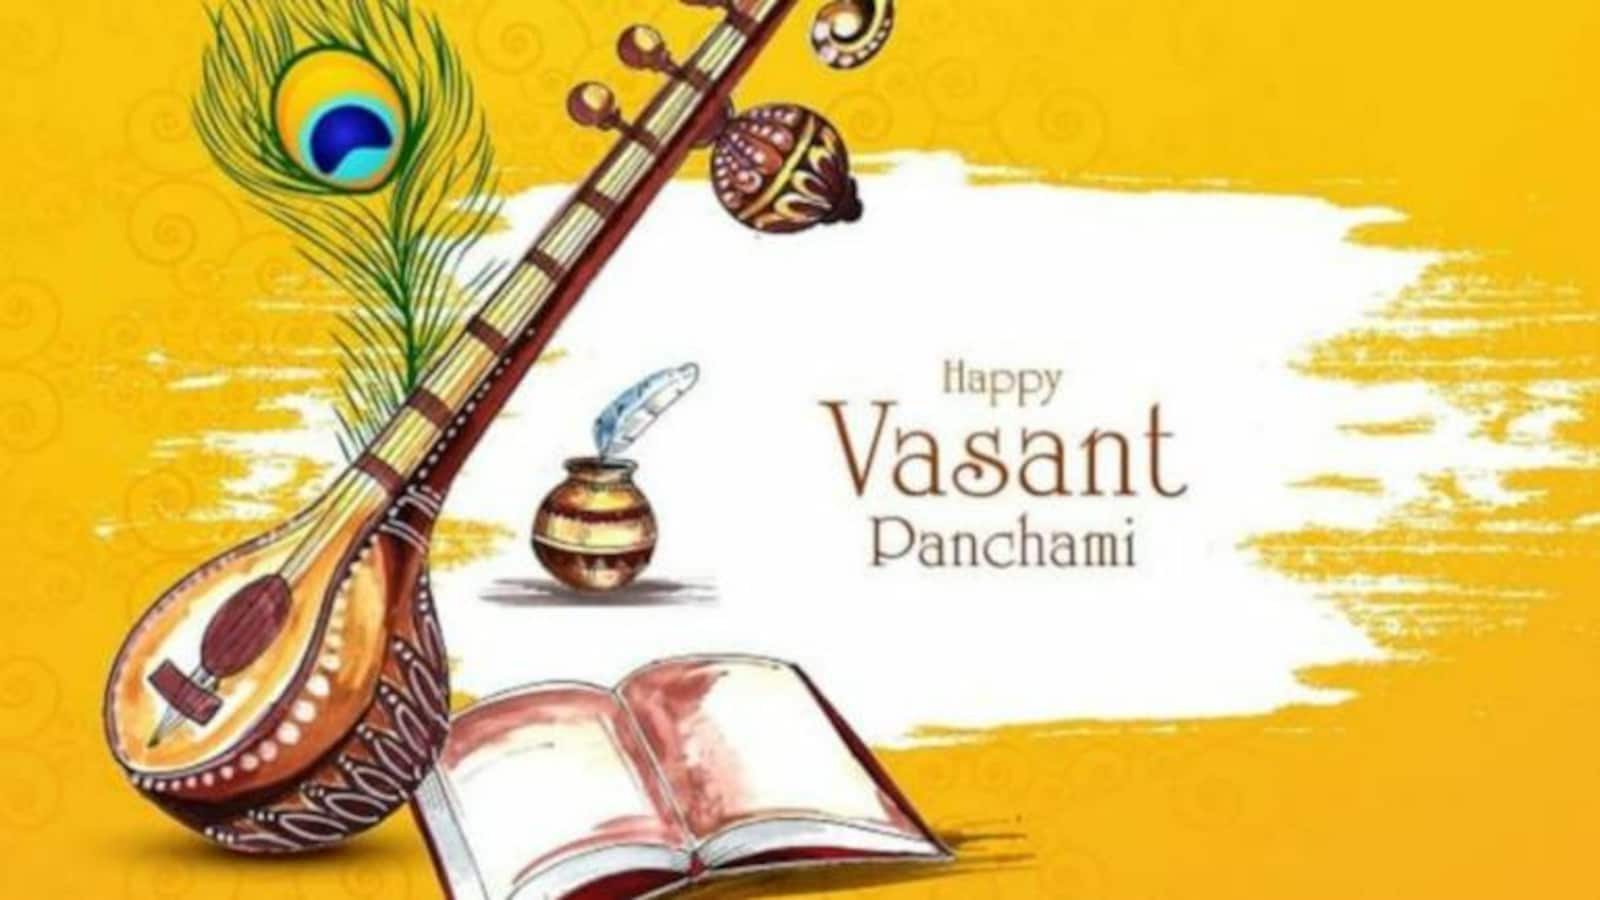 Happy Basant Panchami: Wishes, greetings, messages, pics, Facebook and  WhatsApp status